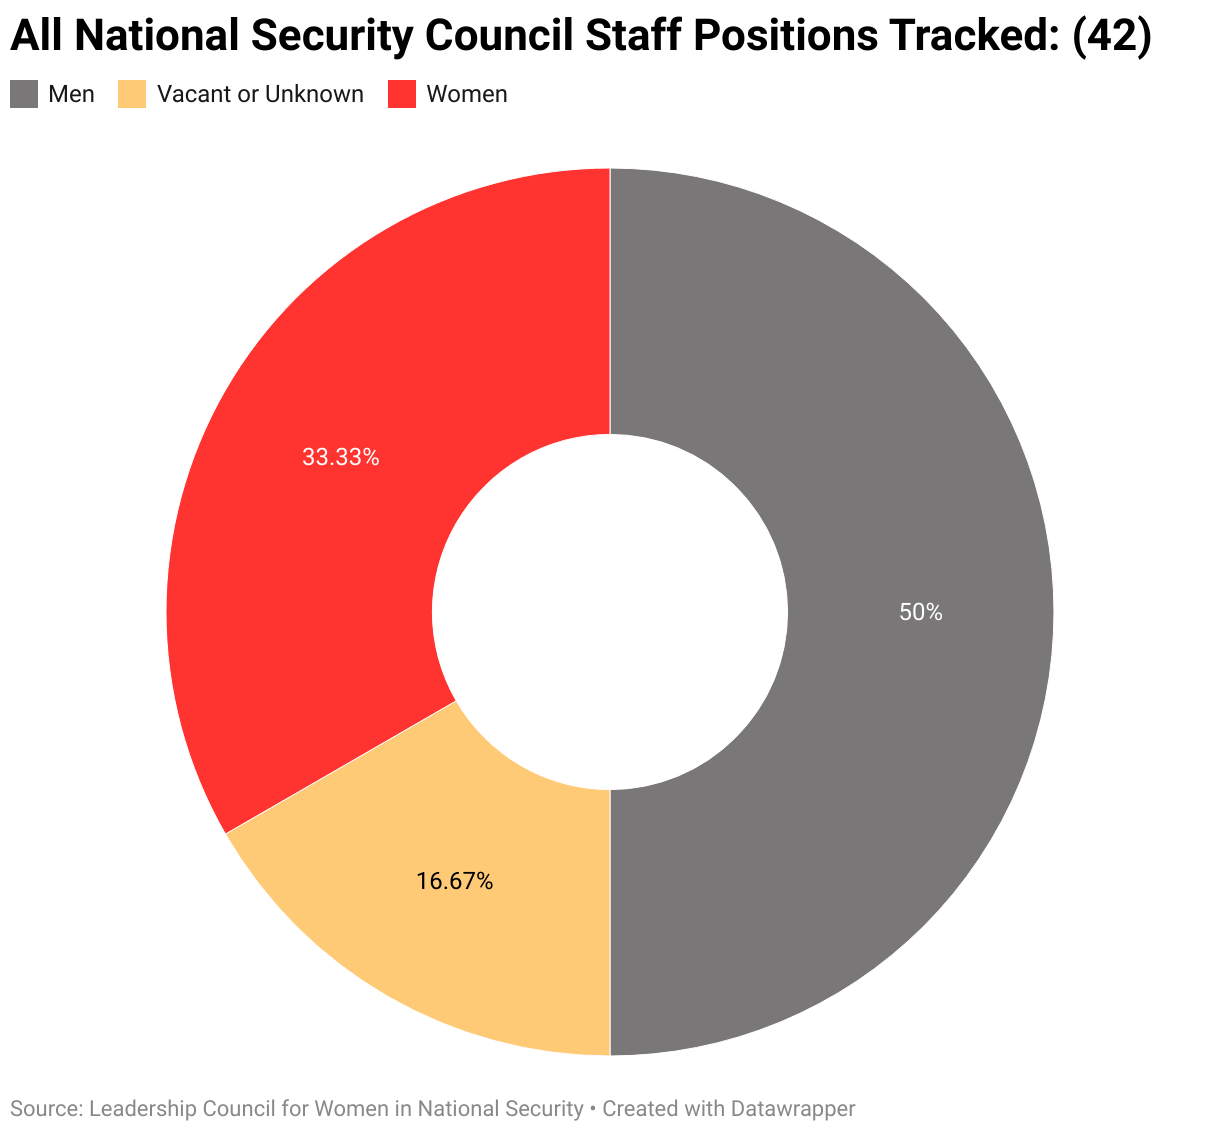 The gendered breakdown of all National Security Council Staff positions tracked by LCWINS (42).